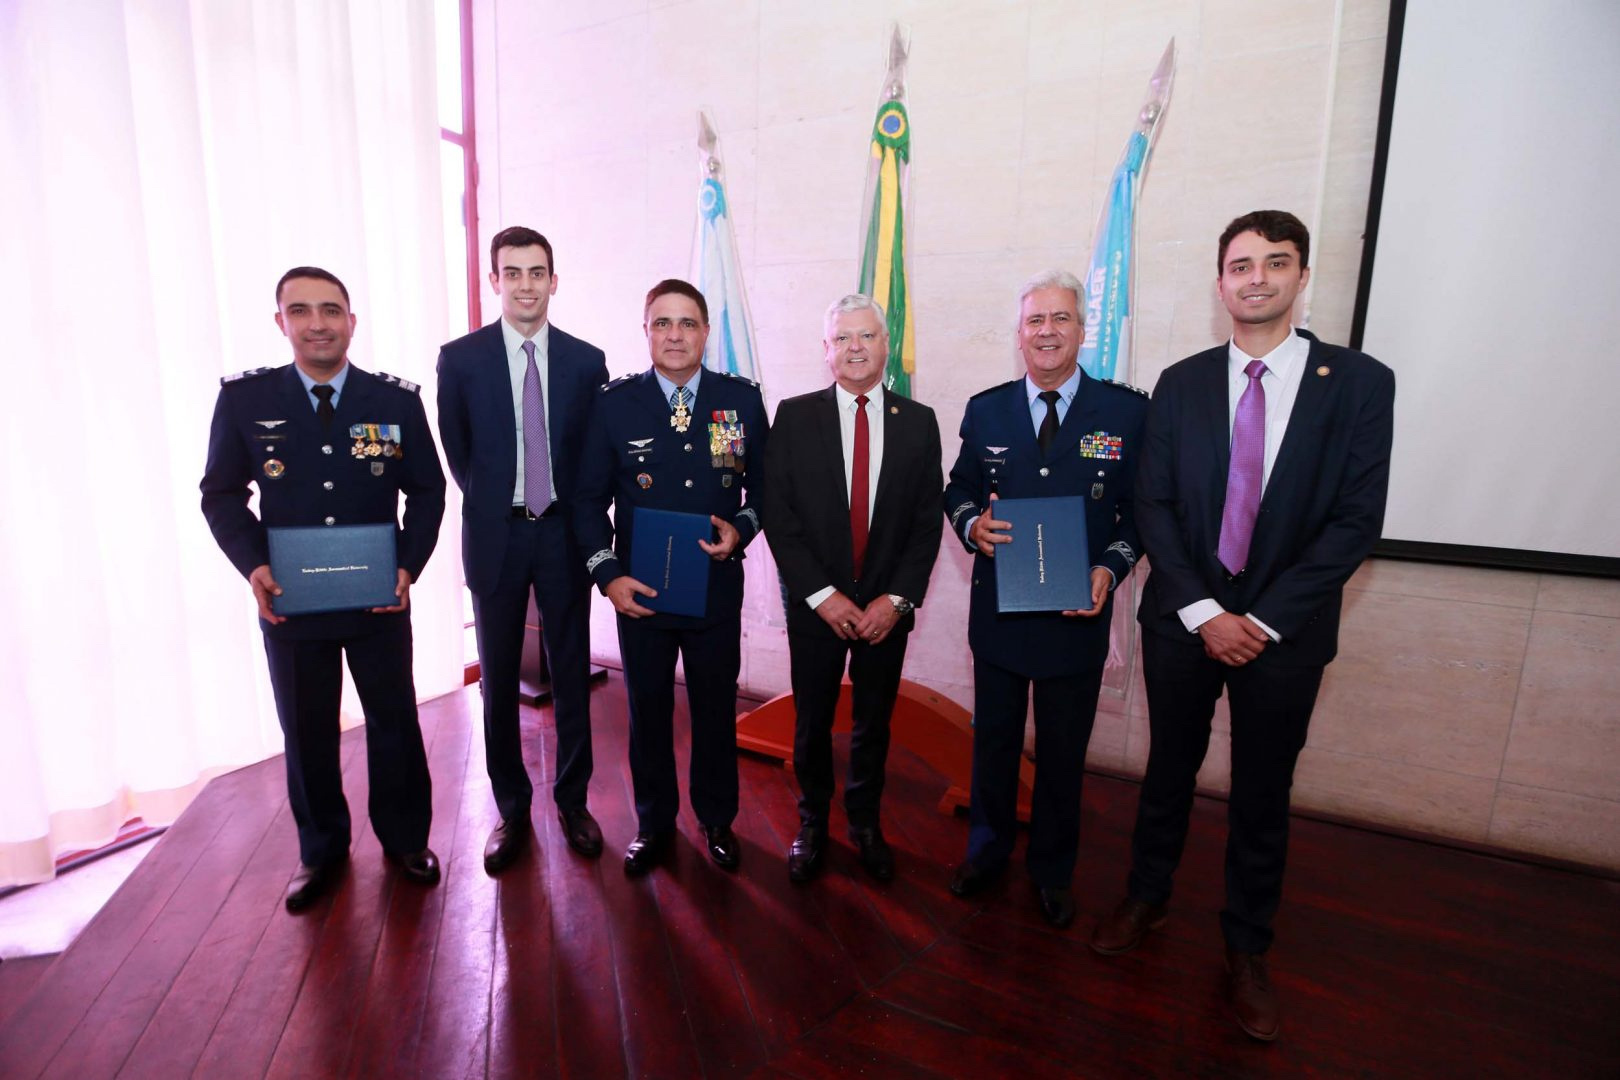 From Left to right: General Camilo, Mr. Fabio Campos, General Sergio Bastos, Dr. John Watret, General Domingues, and Mr. Israel Treptow. Representatives from DECEA and Embry-Riddle Worldwide. (Pre-pandemic photo)